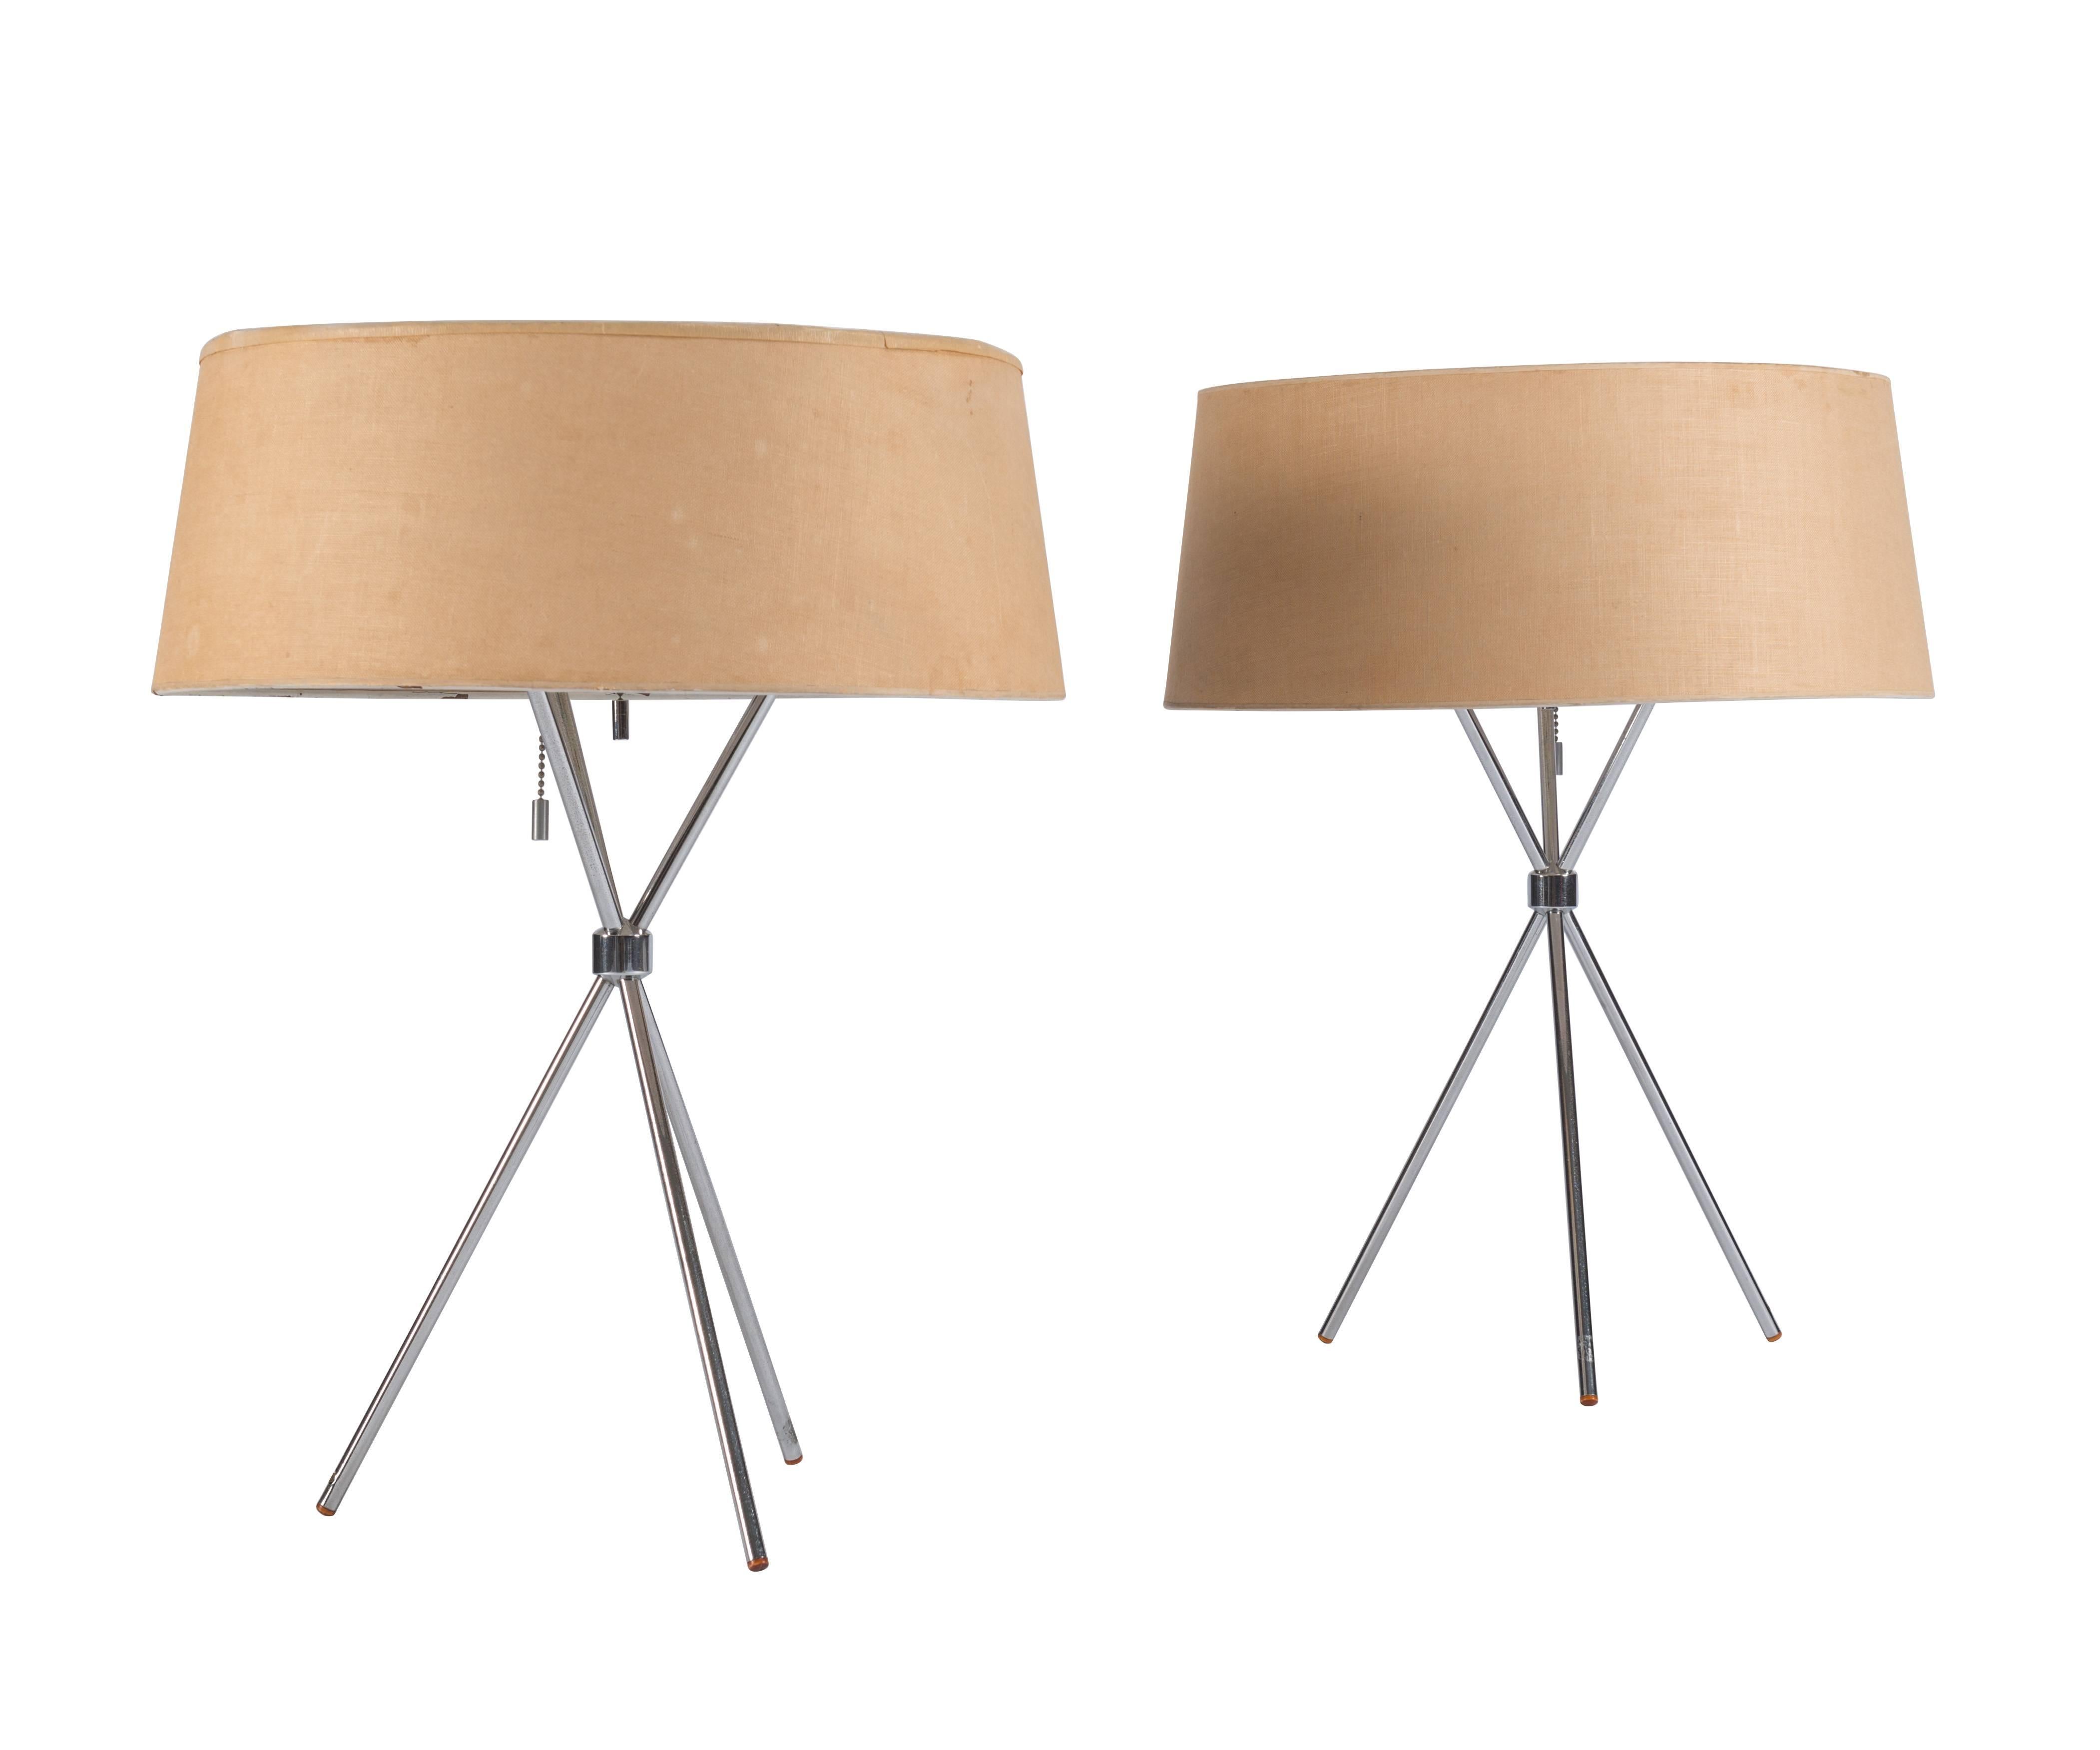 Pair of Robsjohn-Gibbings desirable brushed nickel tripod table lamps manufactured by Hansen Lighting Co. with original shades and signed diffusers.